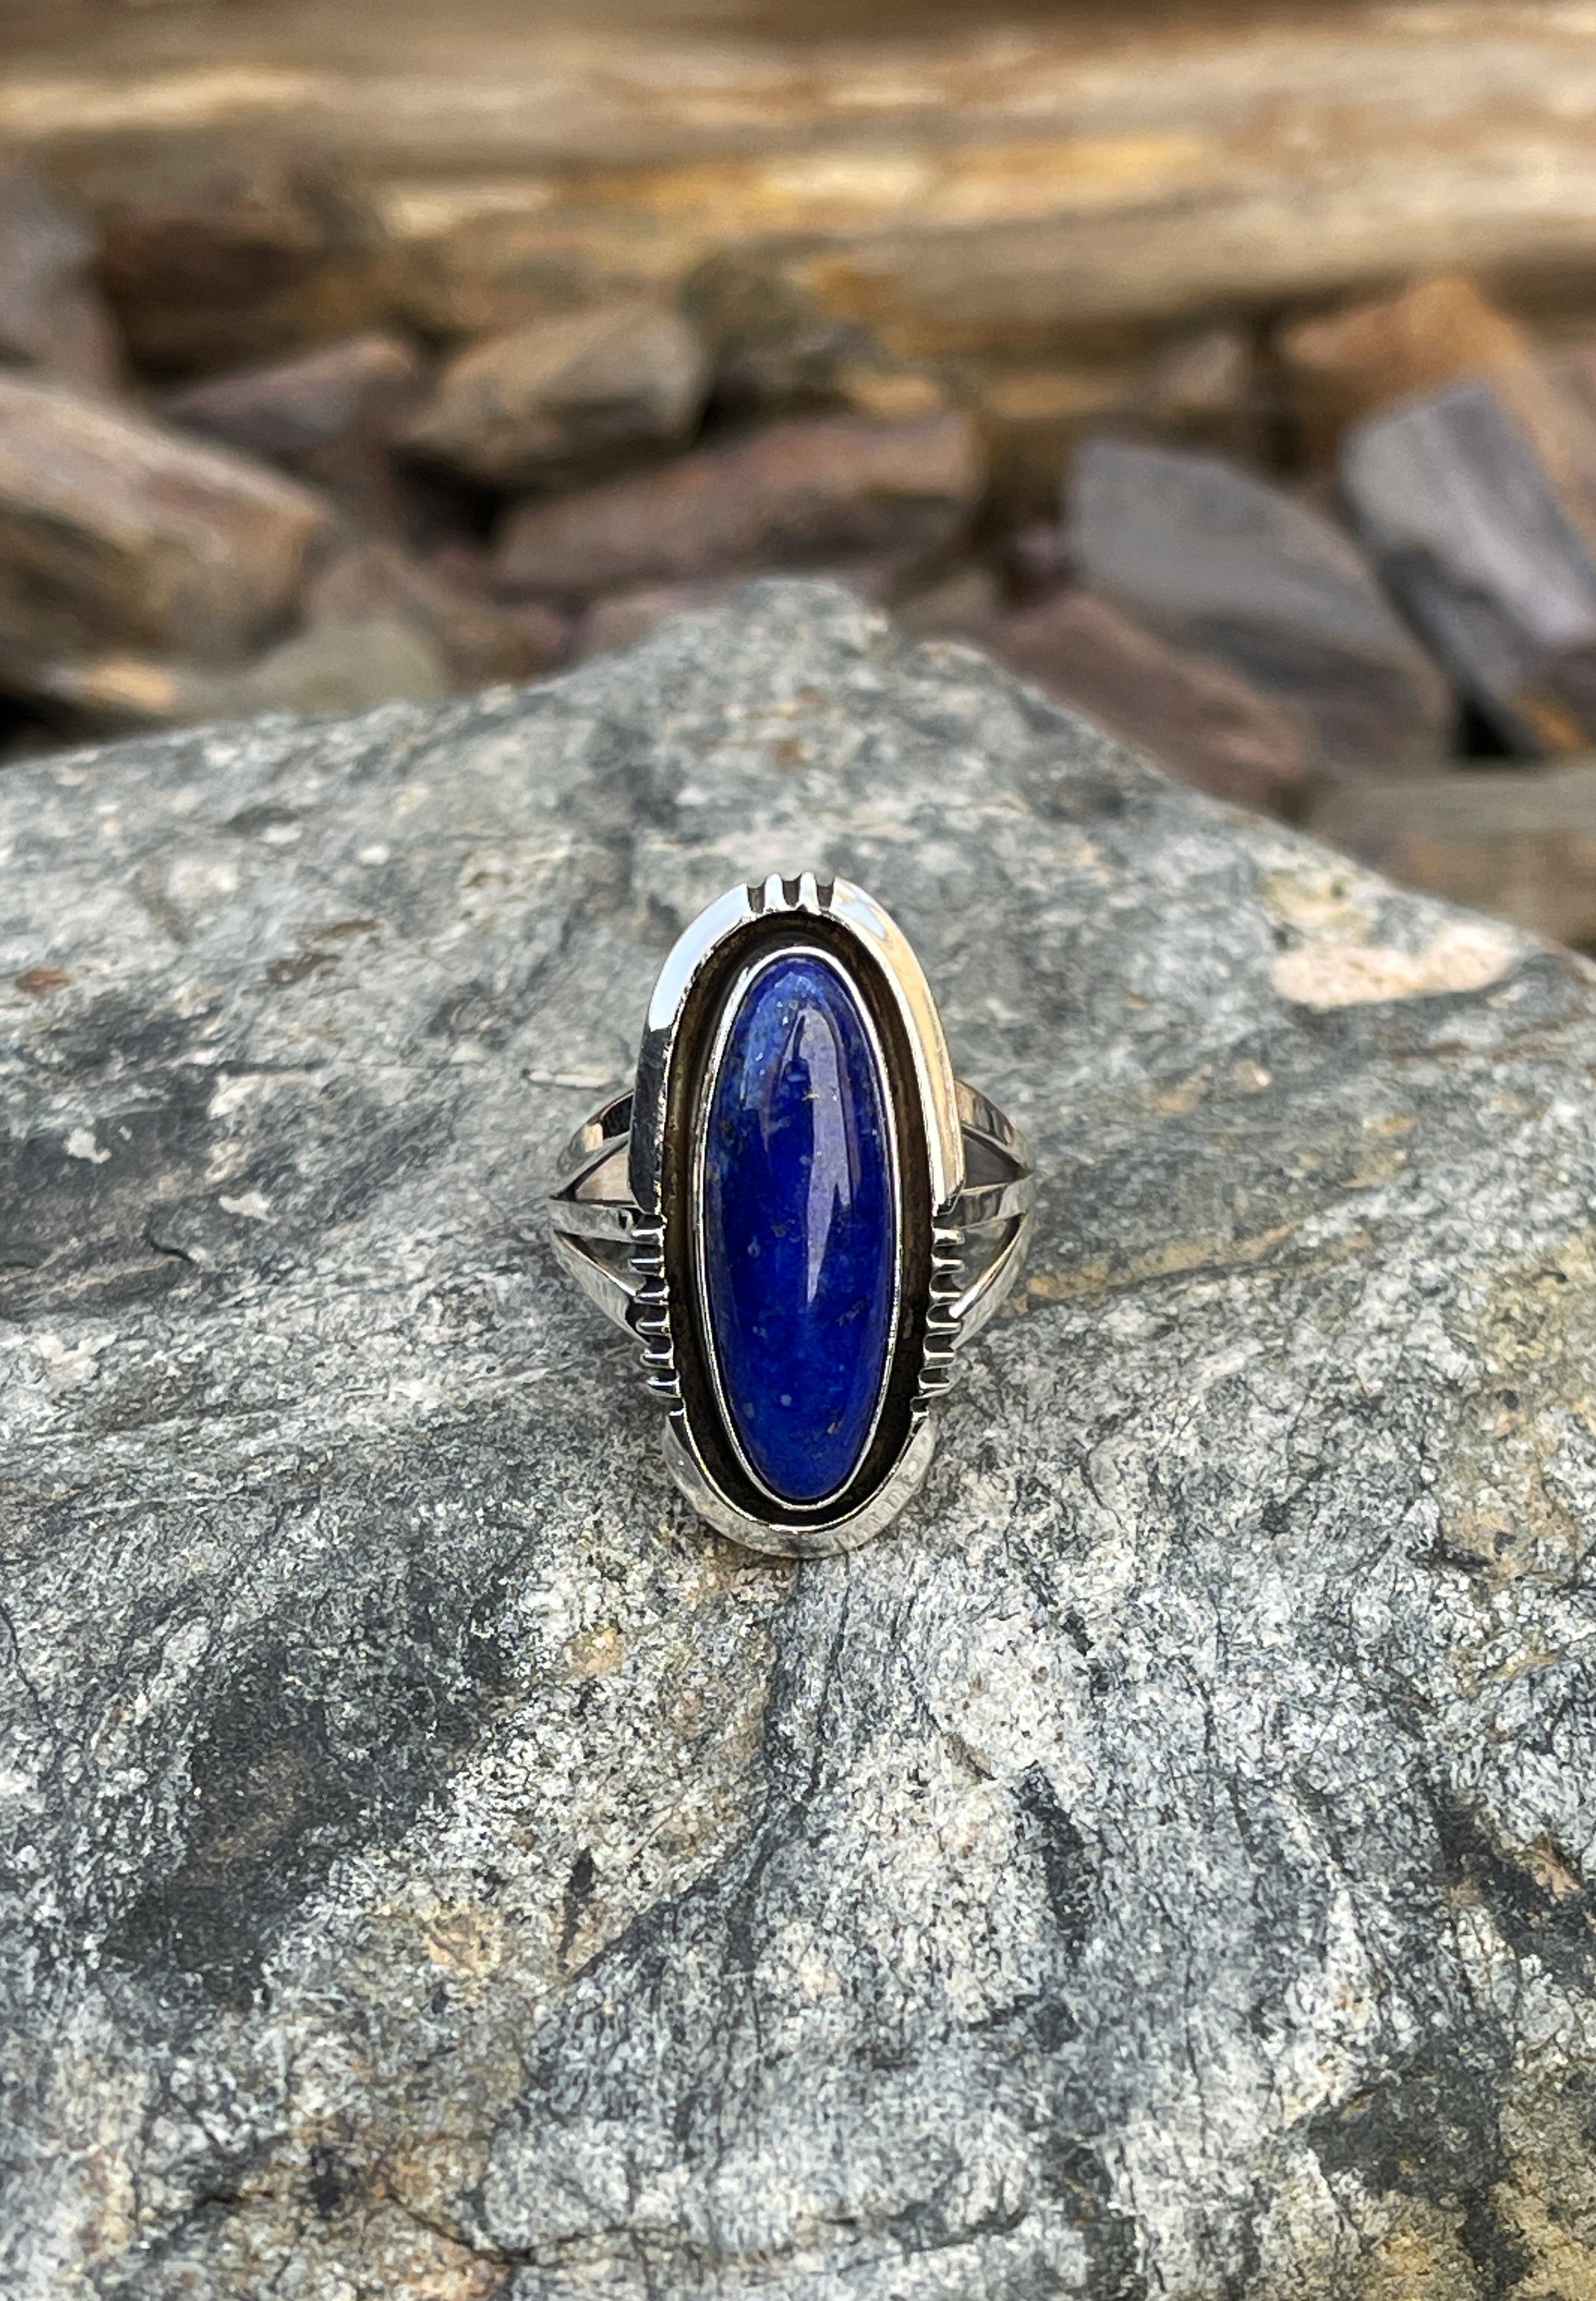 Handmade Solid Sterling Silver Blue Lapis Ring with Shadow Box Trim - Size 8